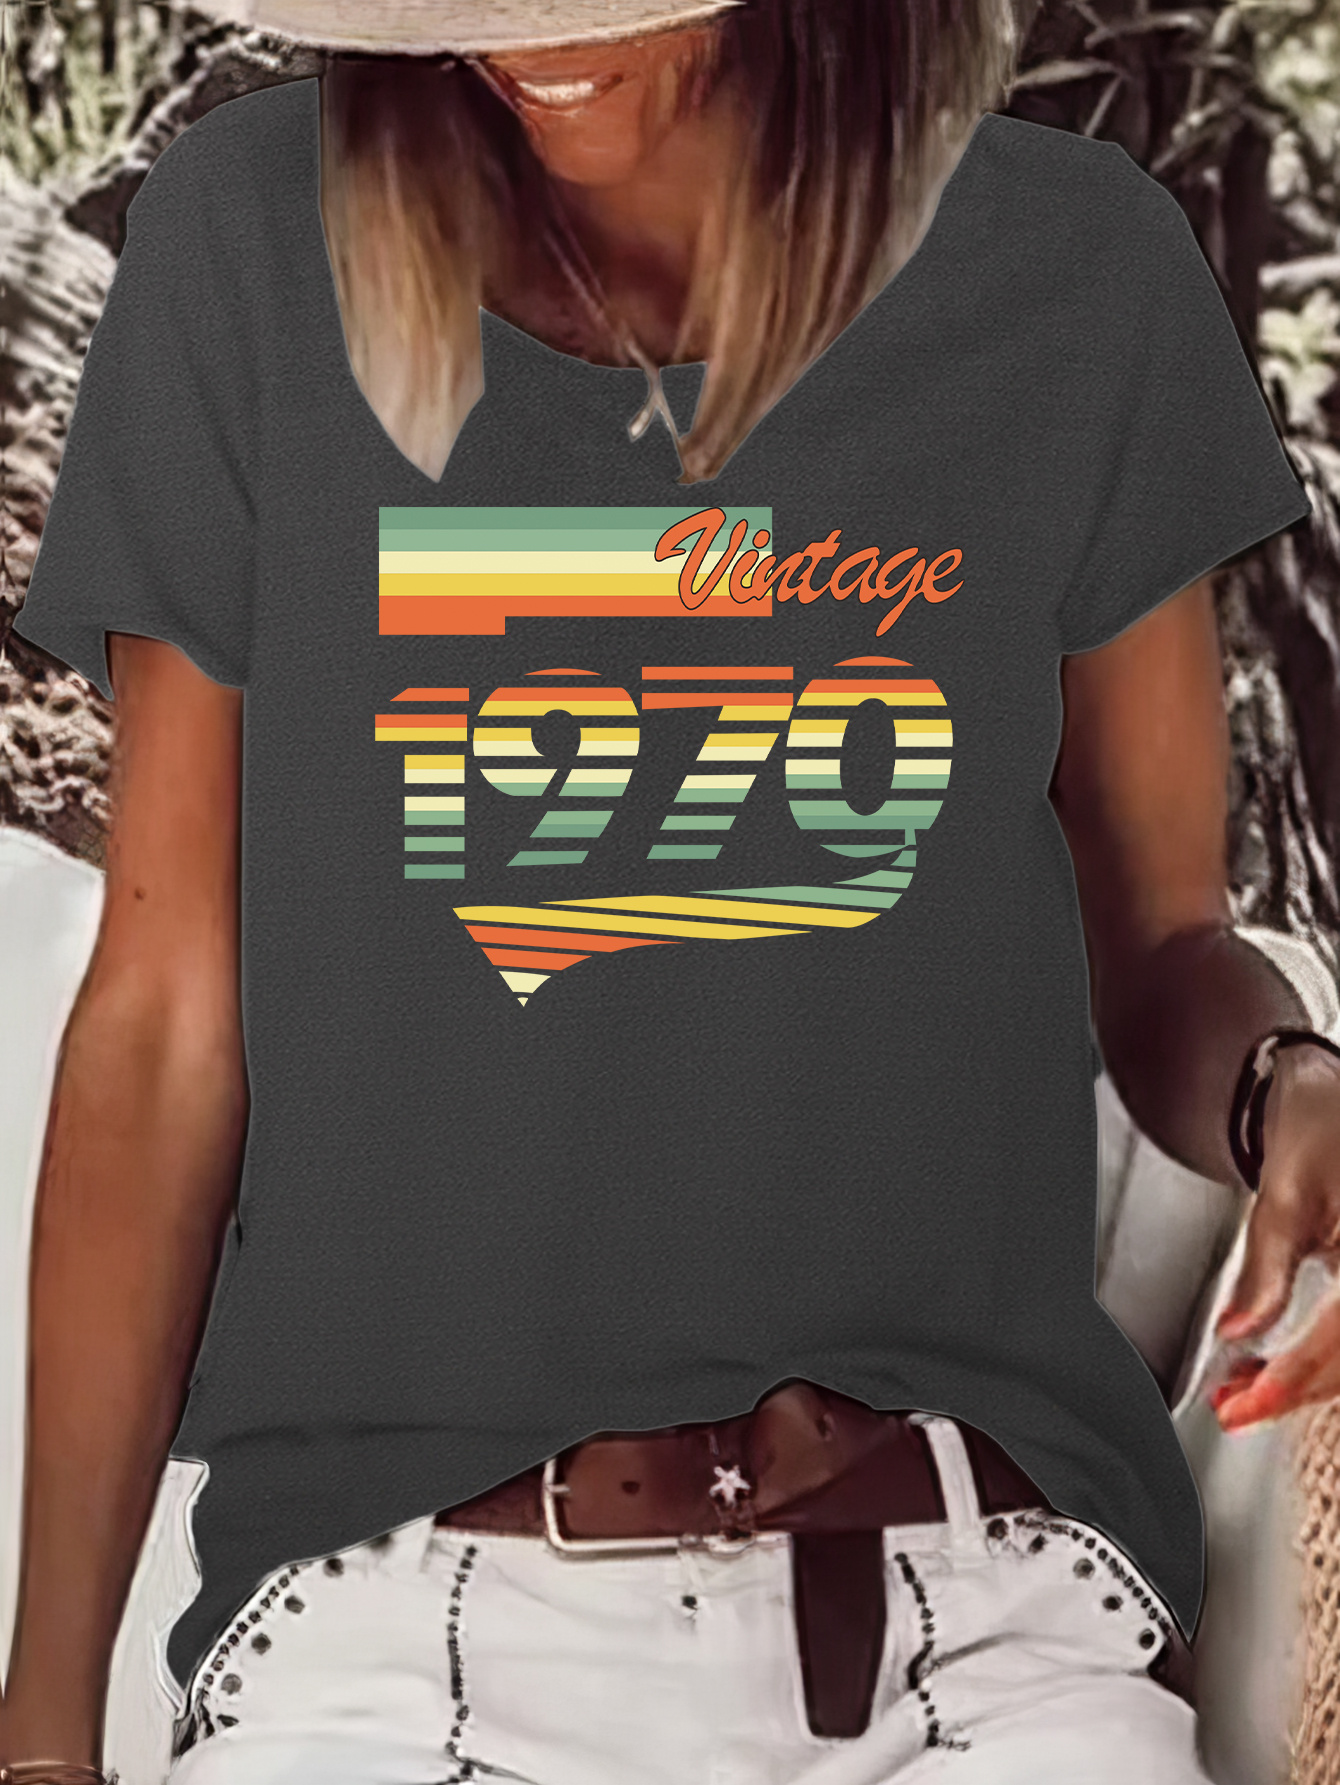 Women Vintage Rock Band T-Shirt Fashion Music Cassettes Graphic Retro  Distressed Tees Summer Short Sleeve Casual Tops at  Women’s Clothing  store